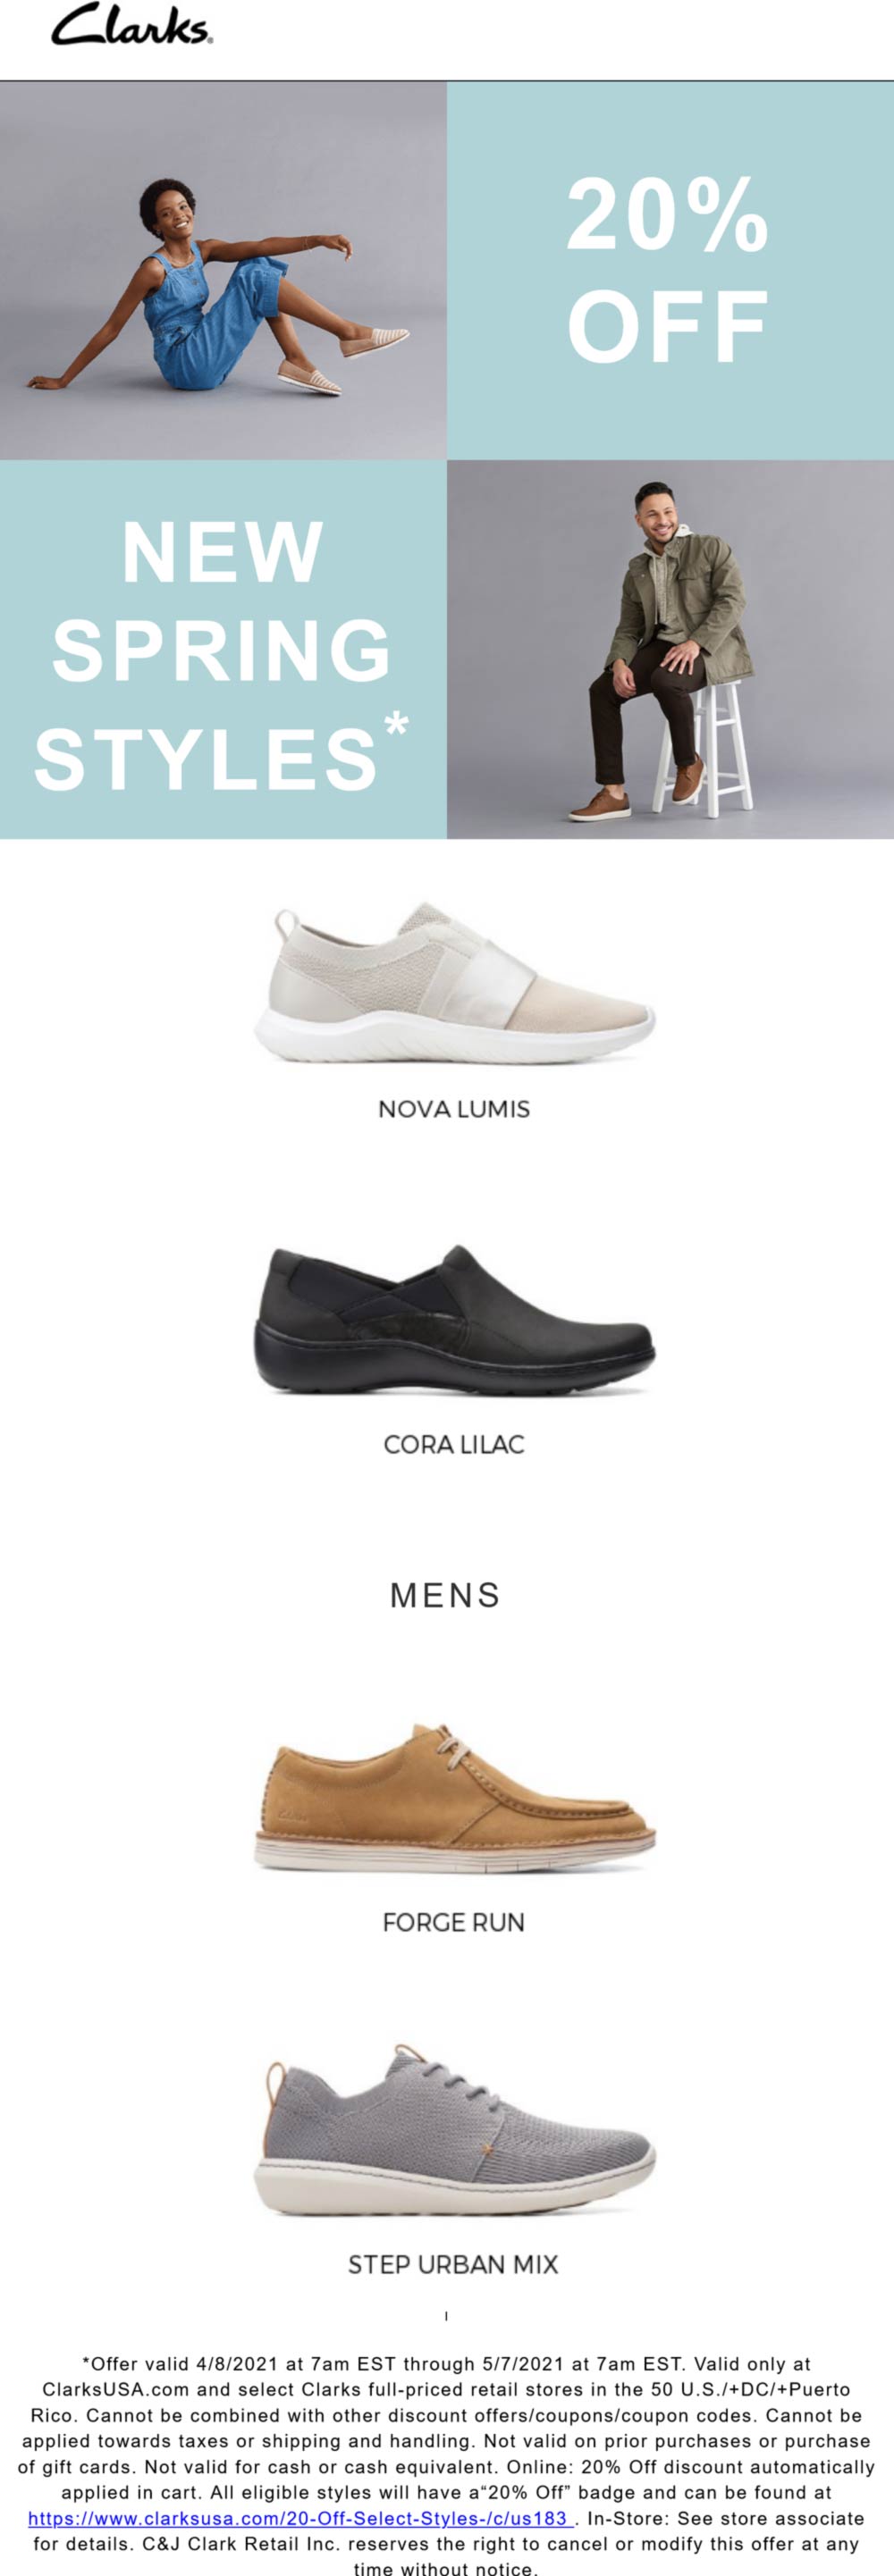 Clarks stores Coupon  20% off at Clarks shoes, ditto online #clarks 